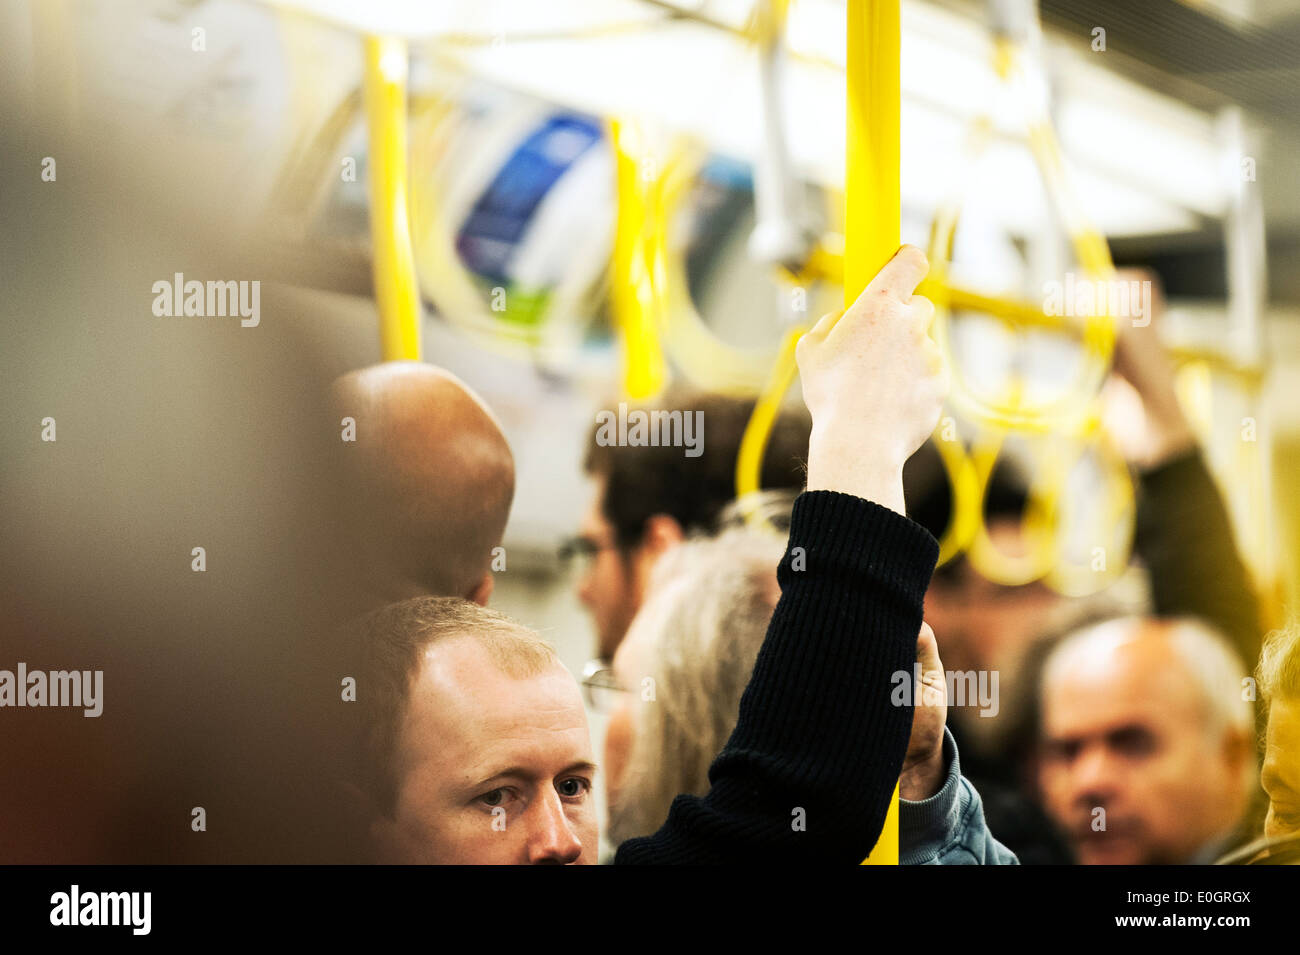 A commuter holding on to a post on a crowded London Underground tube train. Stock Photo